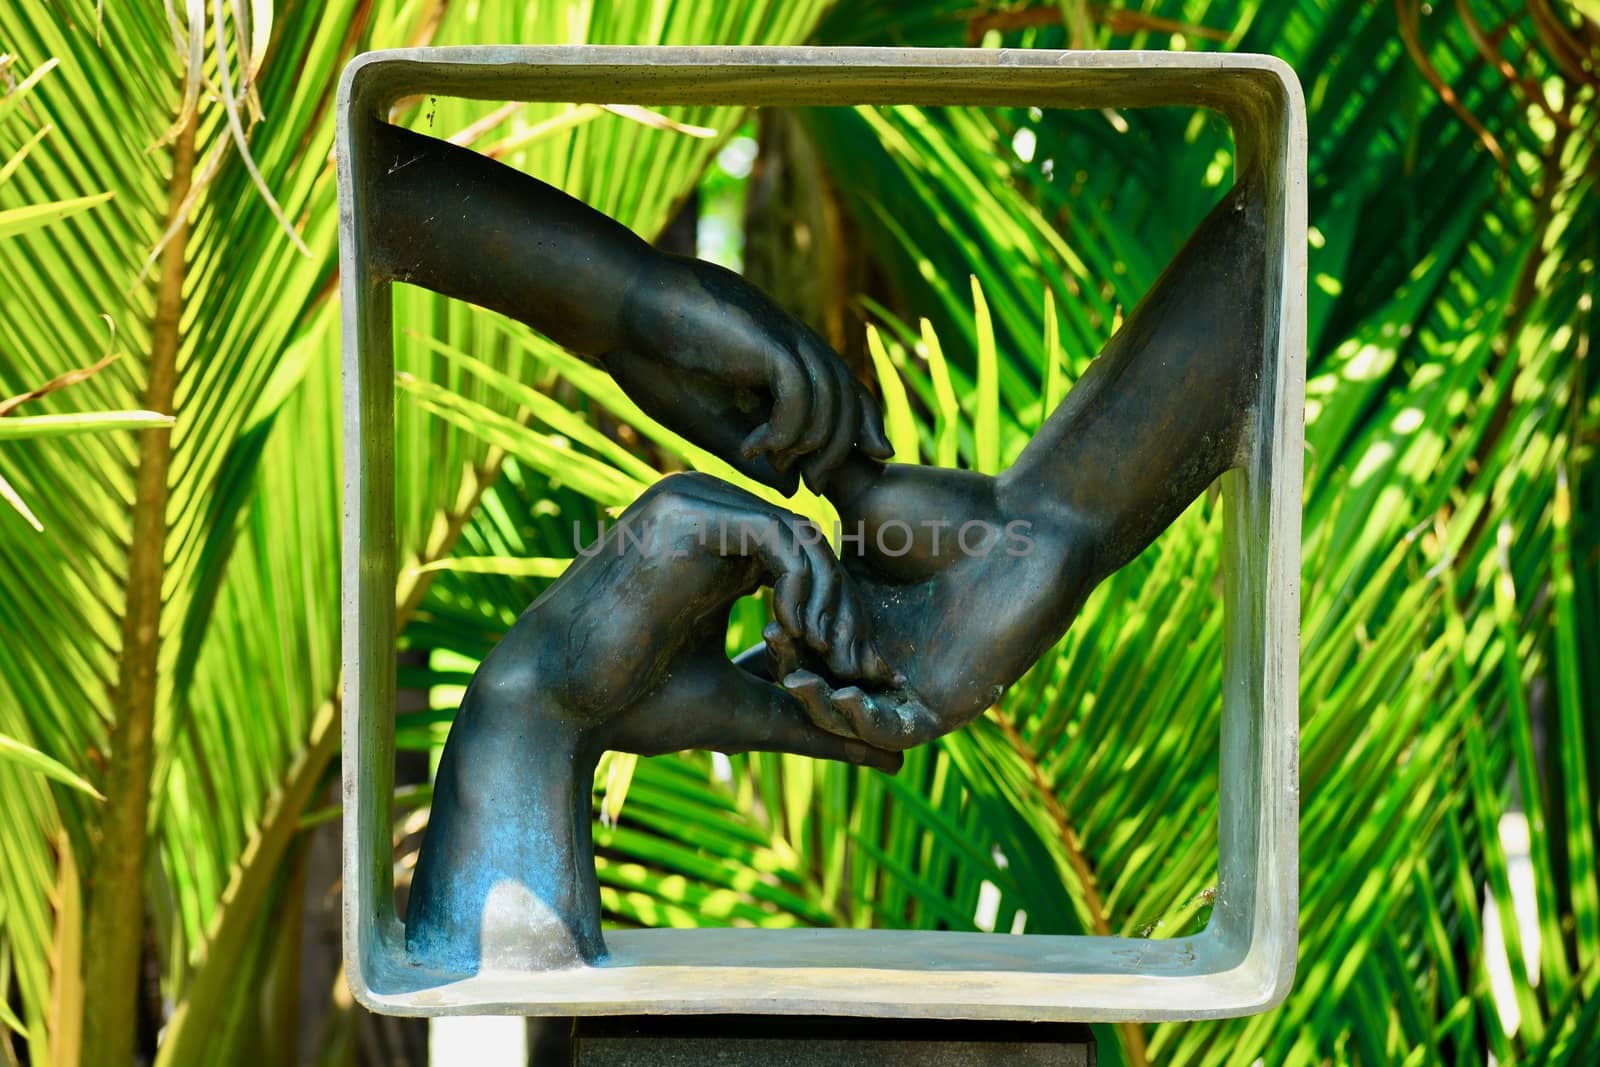 Bronze sculpture representing interconnected human hands; an allegory of harmony, community and friendship.